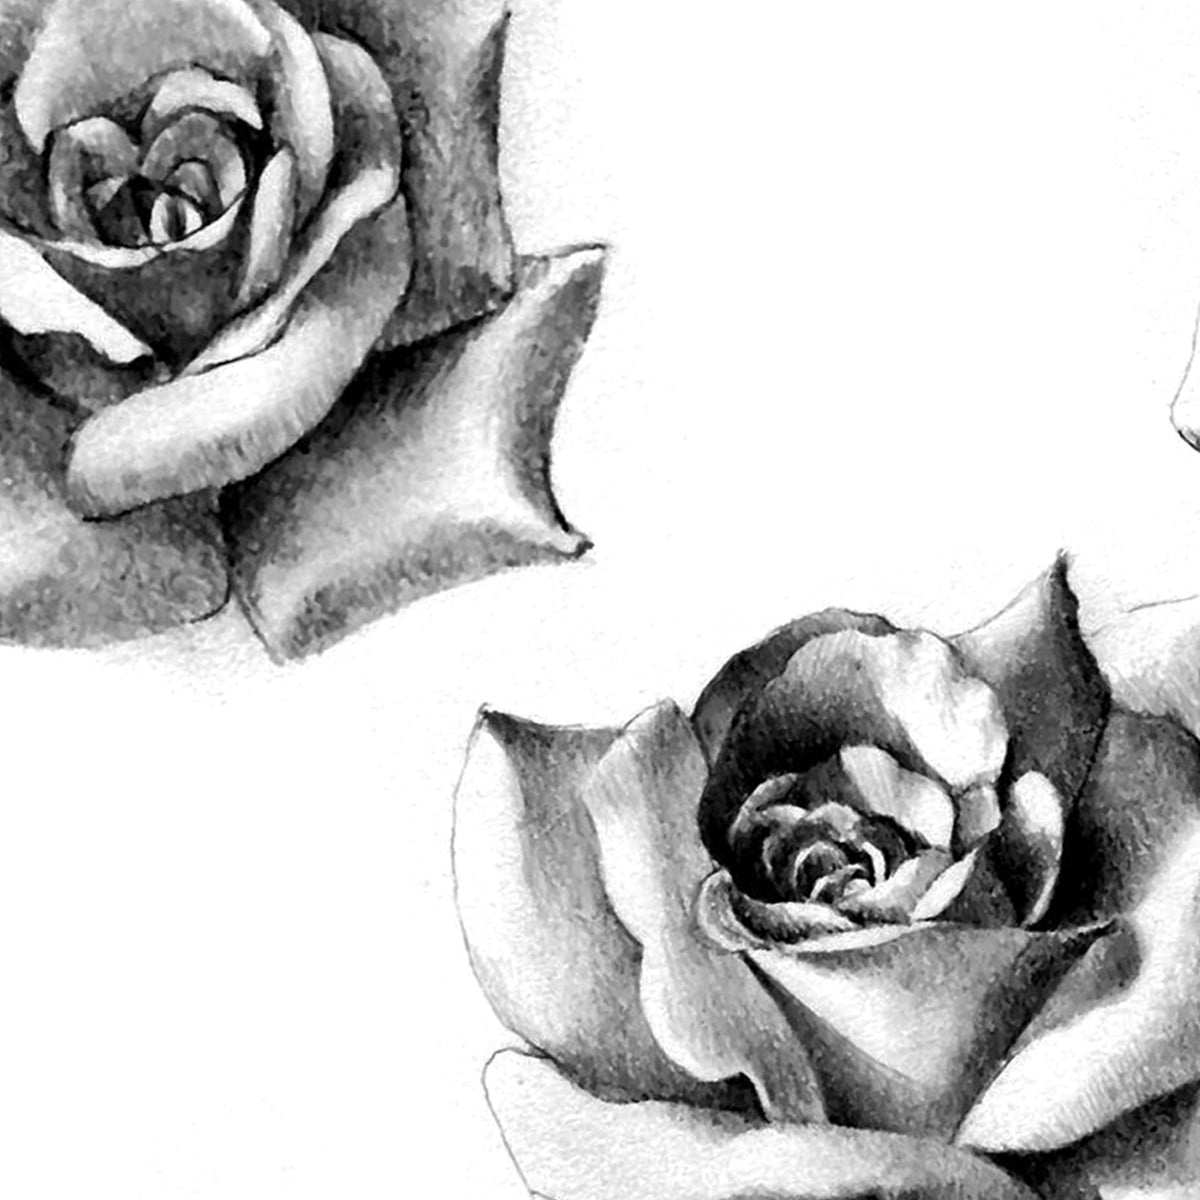 tattoo roses black and grey outline